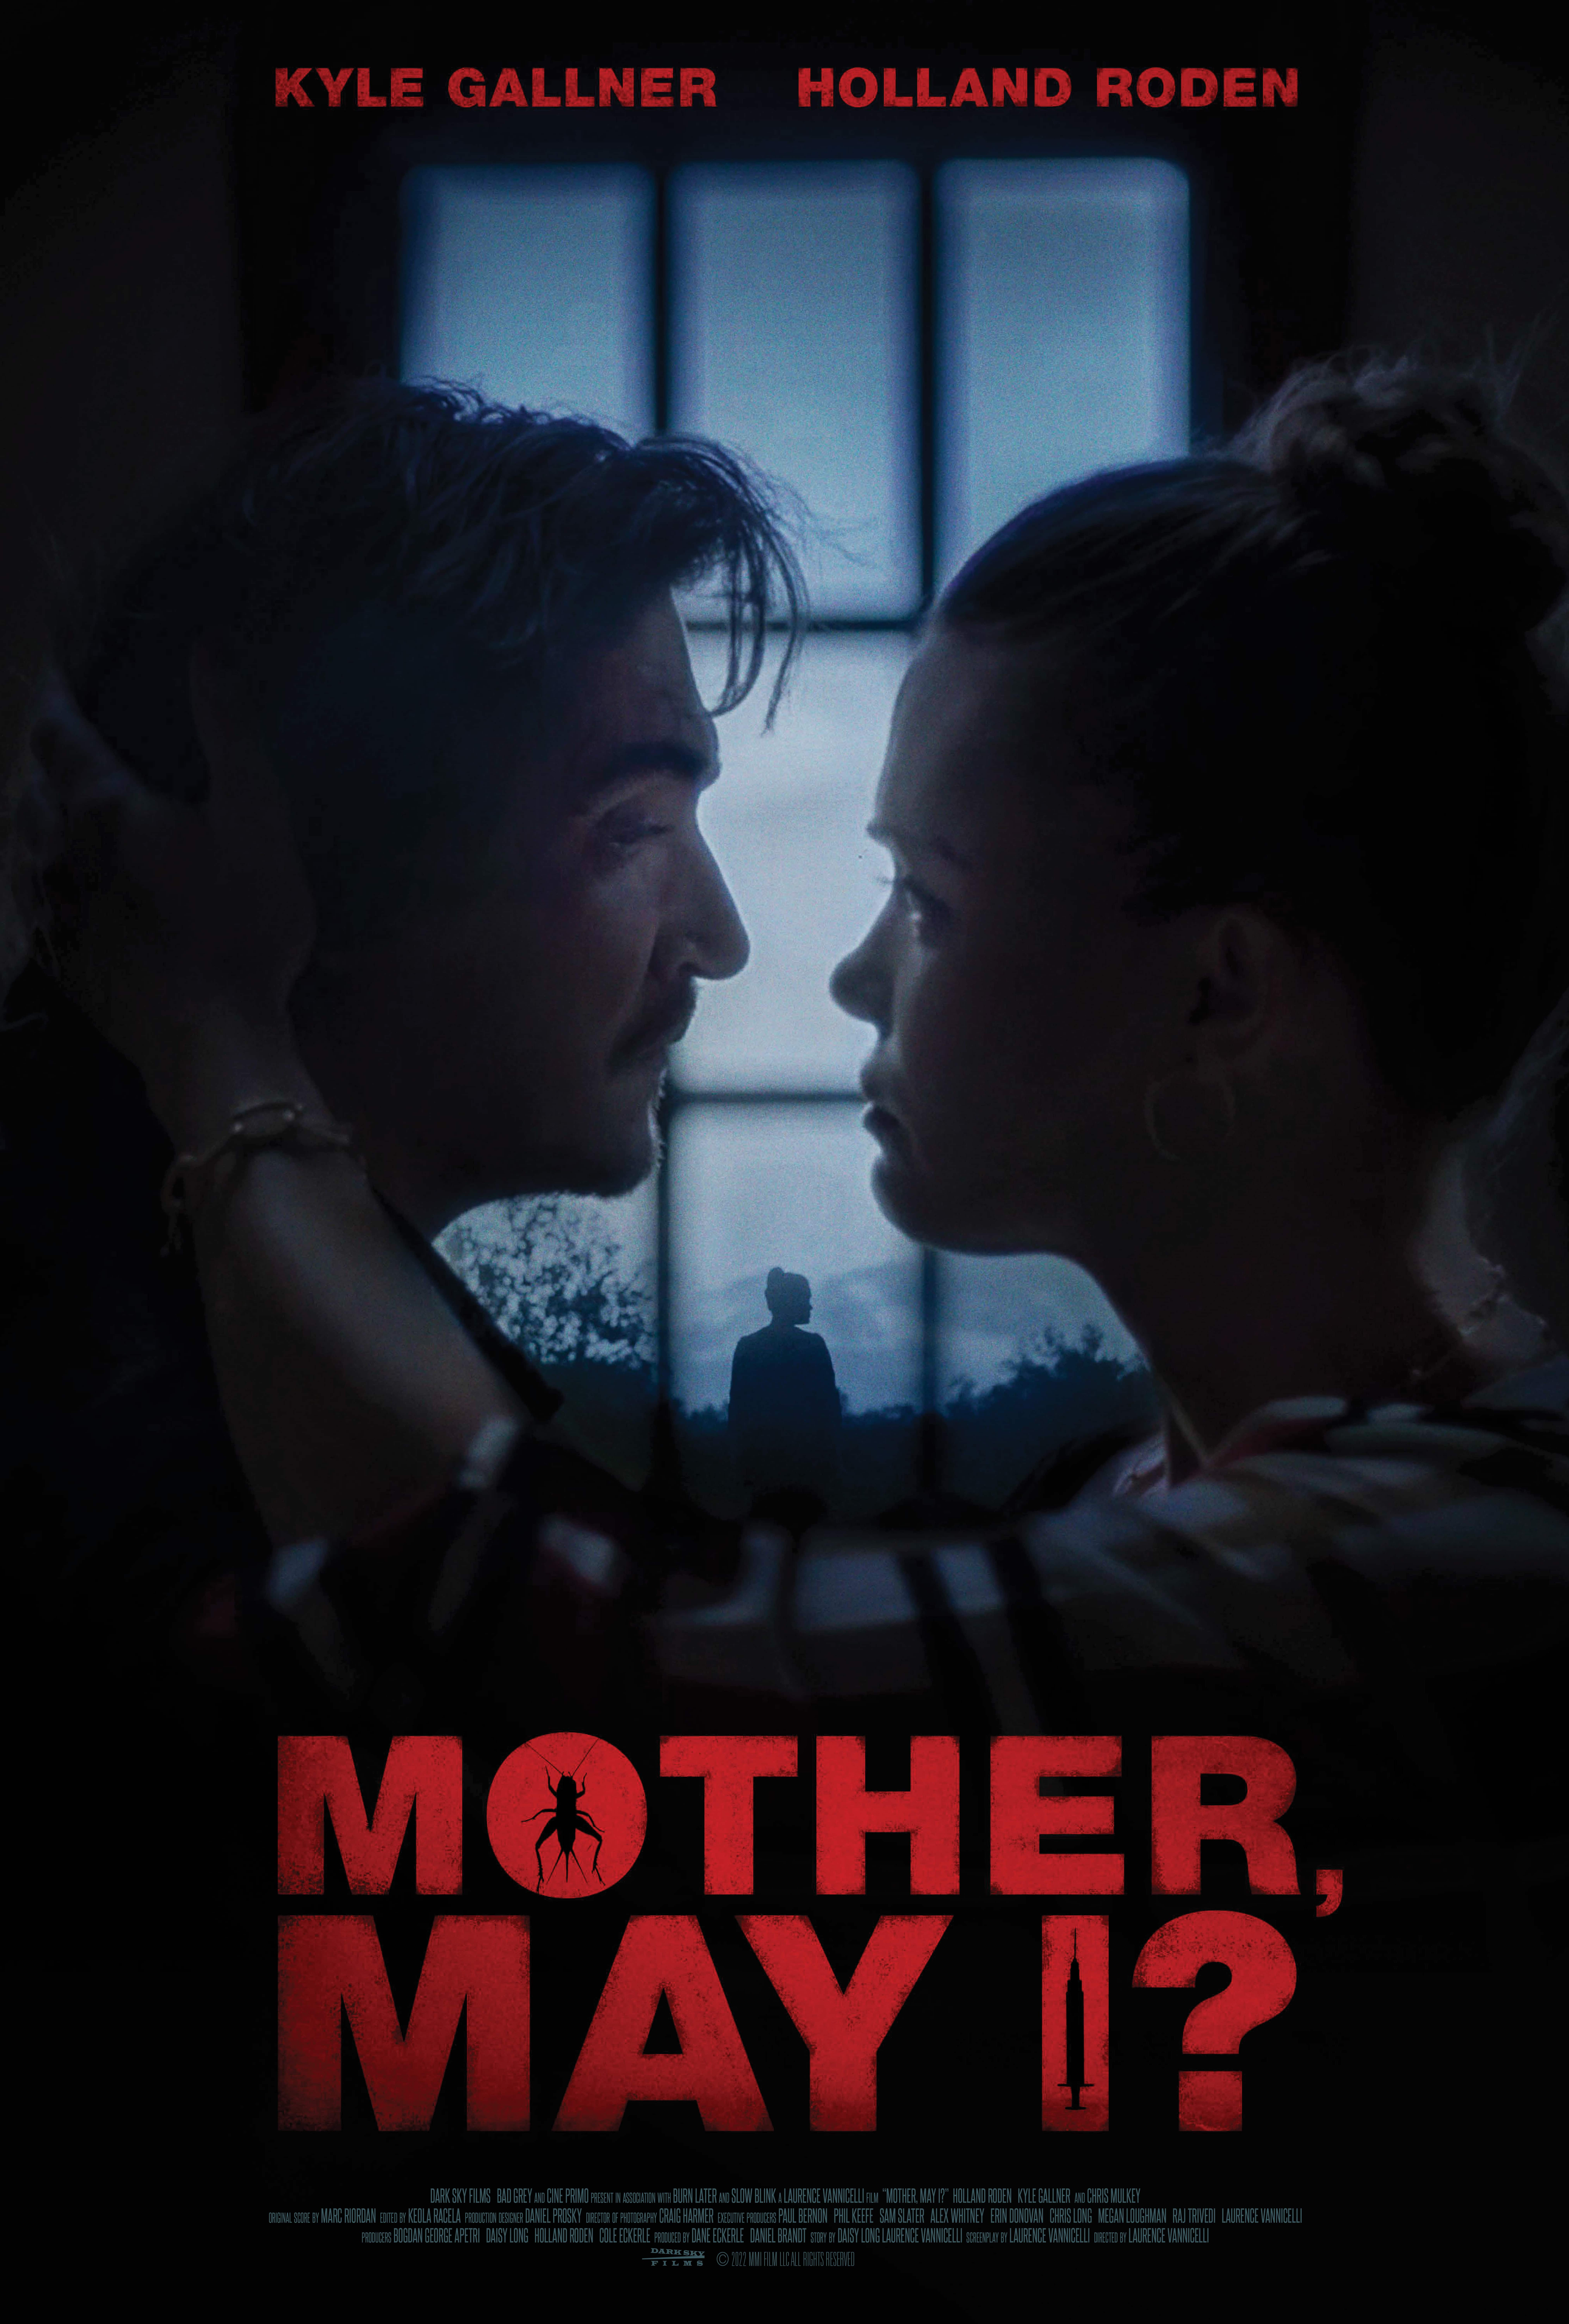 Mother, May I? - A Spine-Chilling Thriller Arriving Soon 22